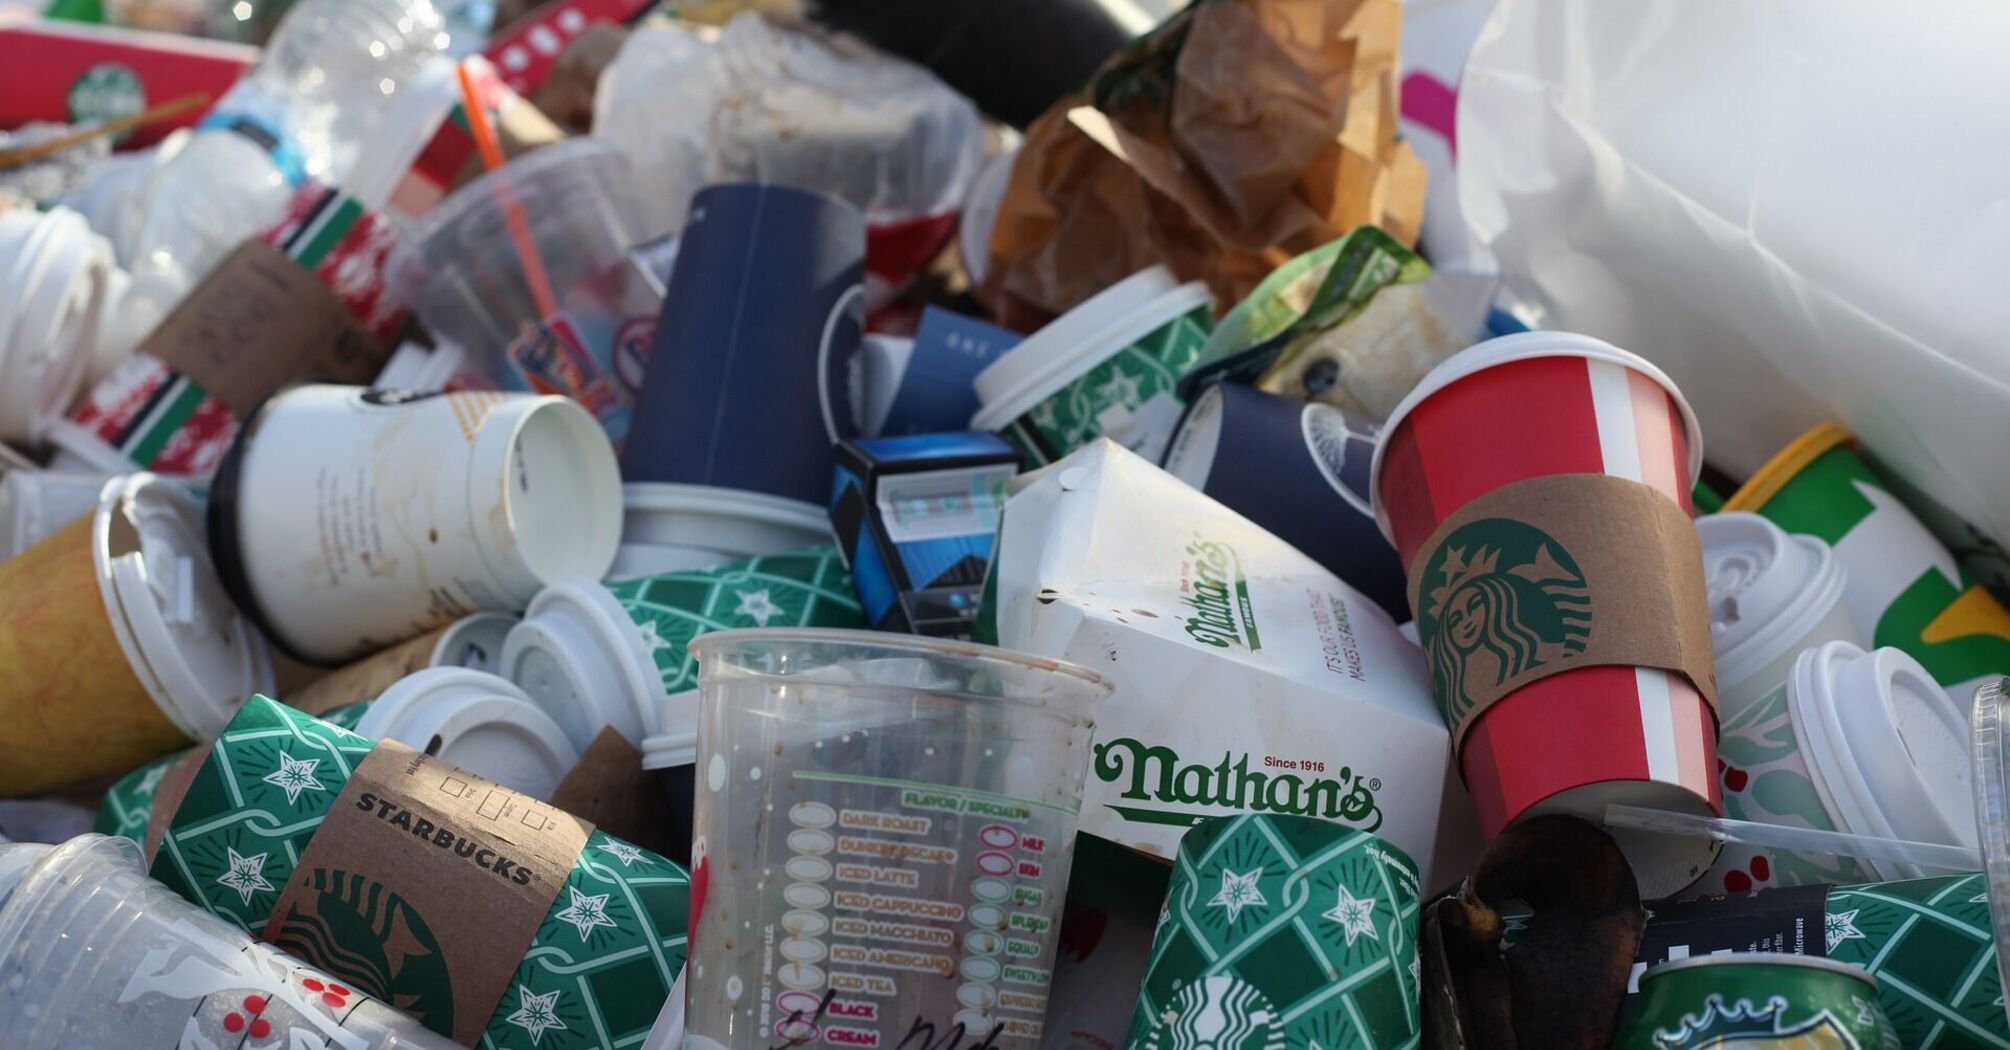 A pile of discarded coffee cups and food containers